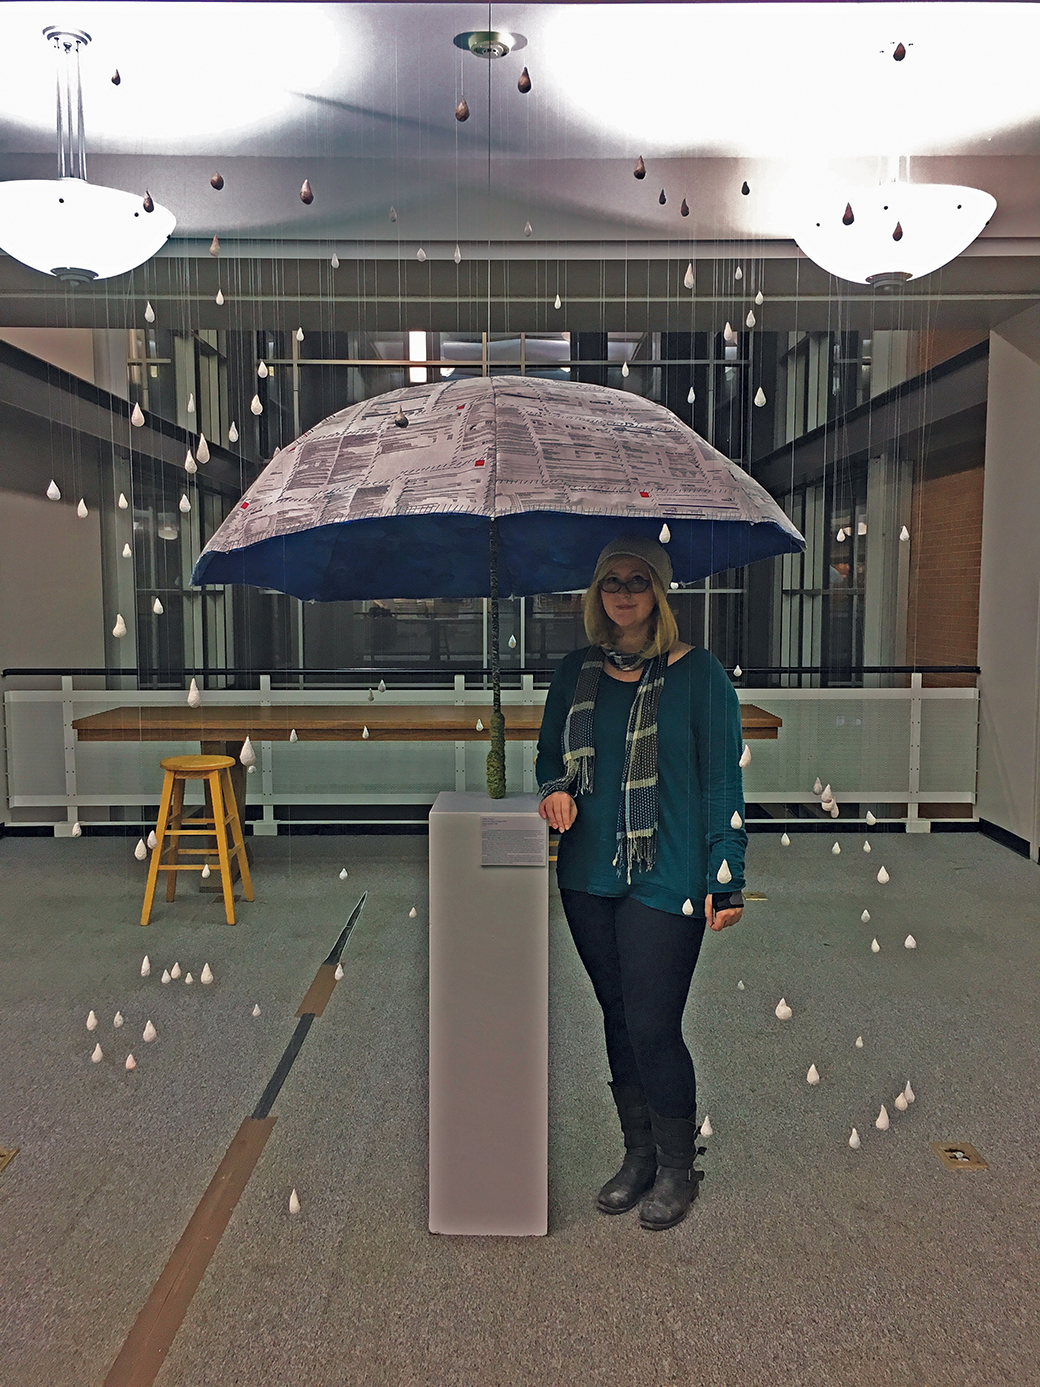 Graduate student finds inspiration in past for umbrella art display